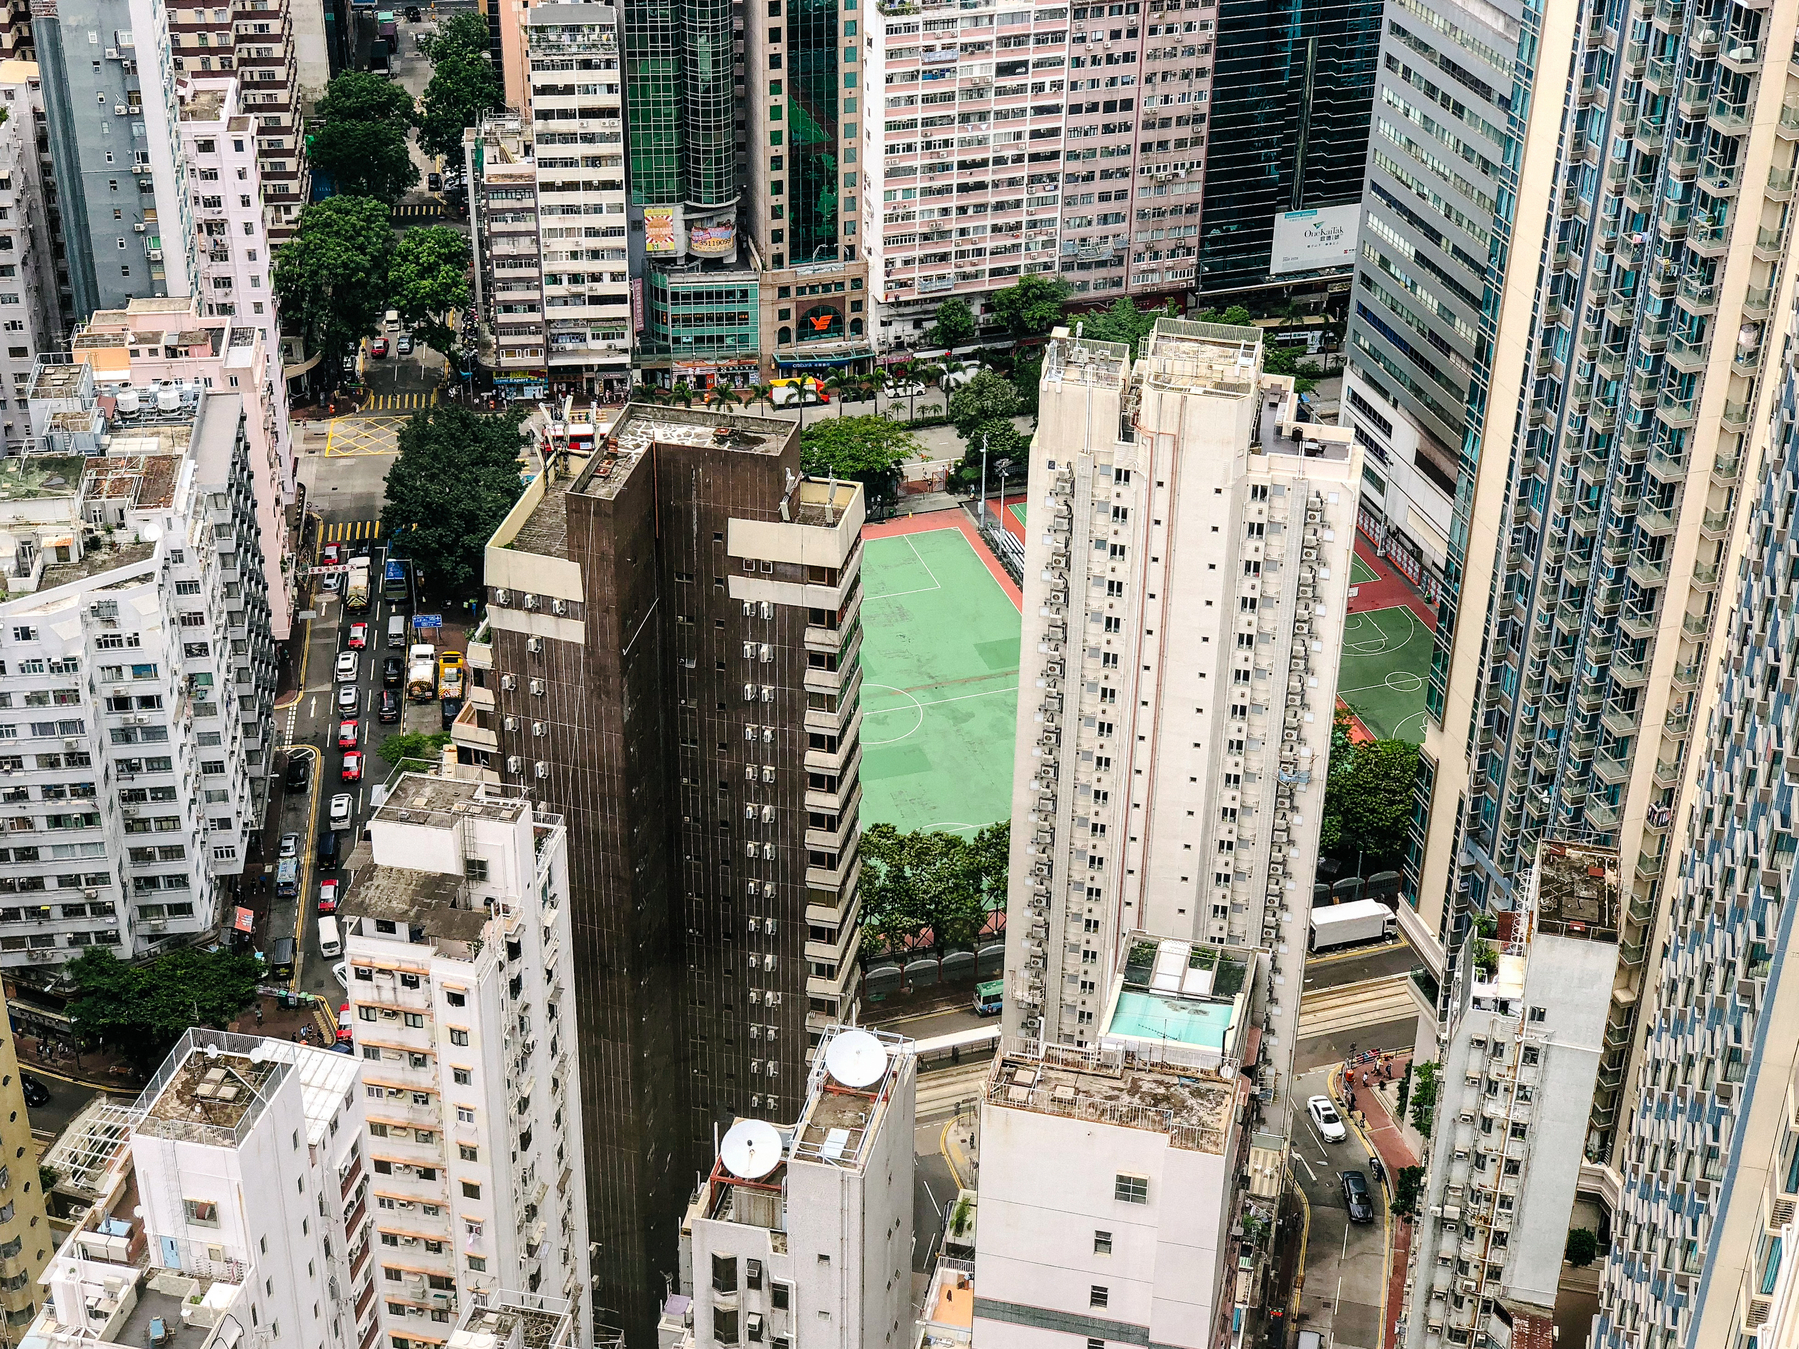 looking down from the top of a tall building, you can see a football pitch in the middle of the huge city mess